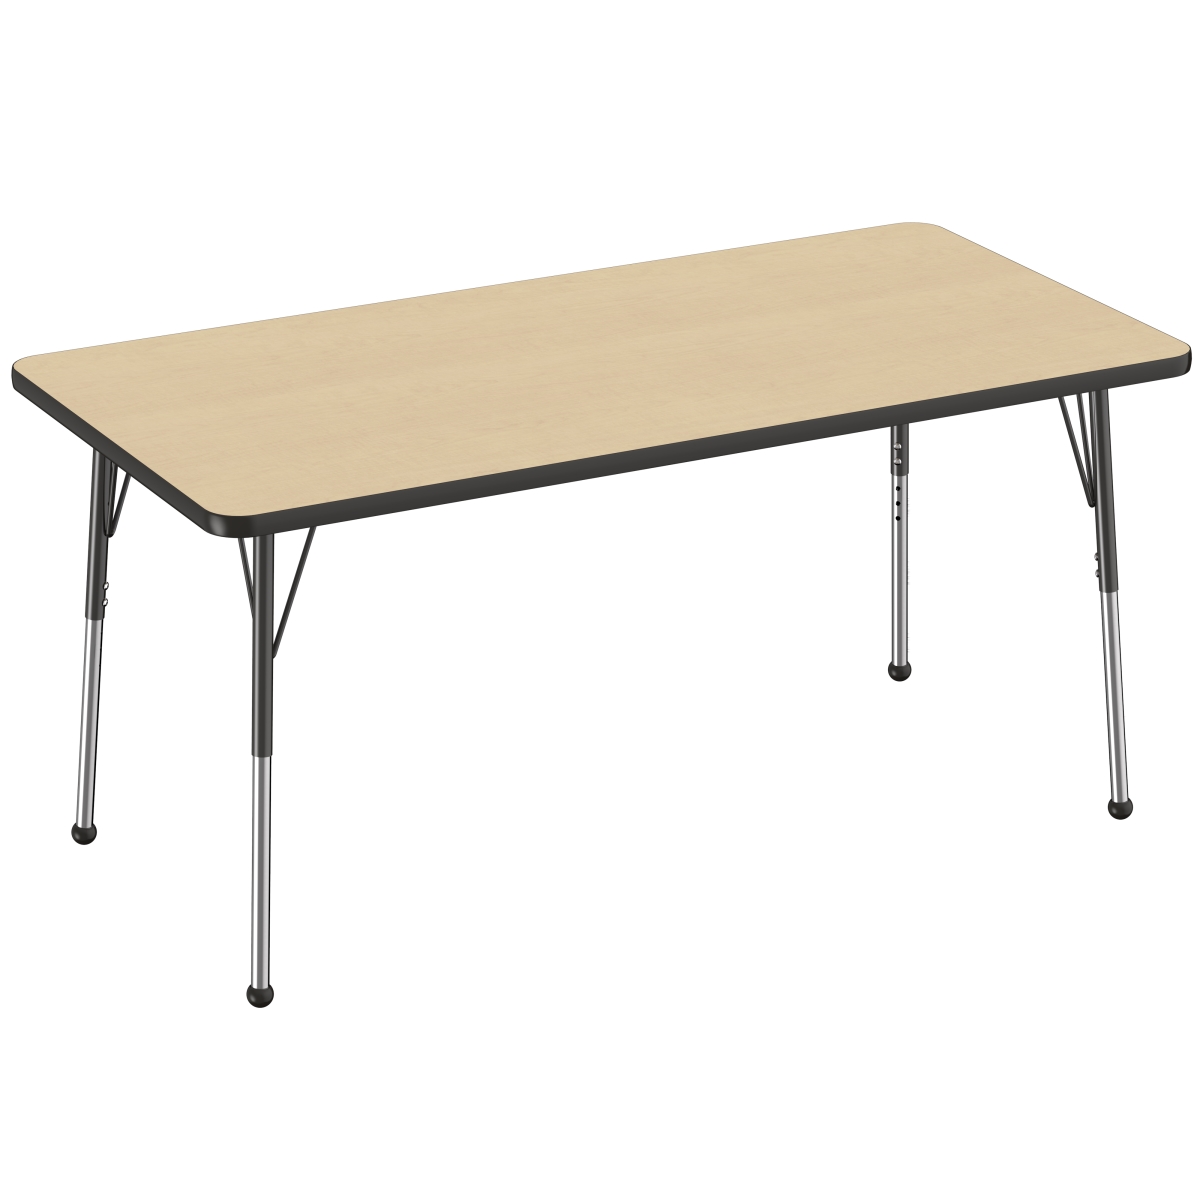 10024-mpbk 30 X 60 In. Rectangle T-mold Adjustable Activity Table With Standard Ball - Maple & Black